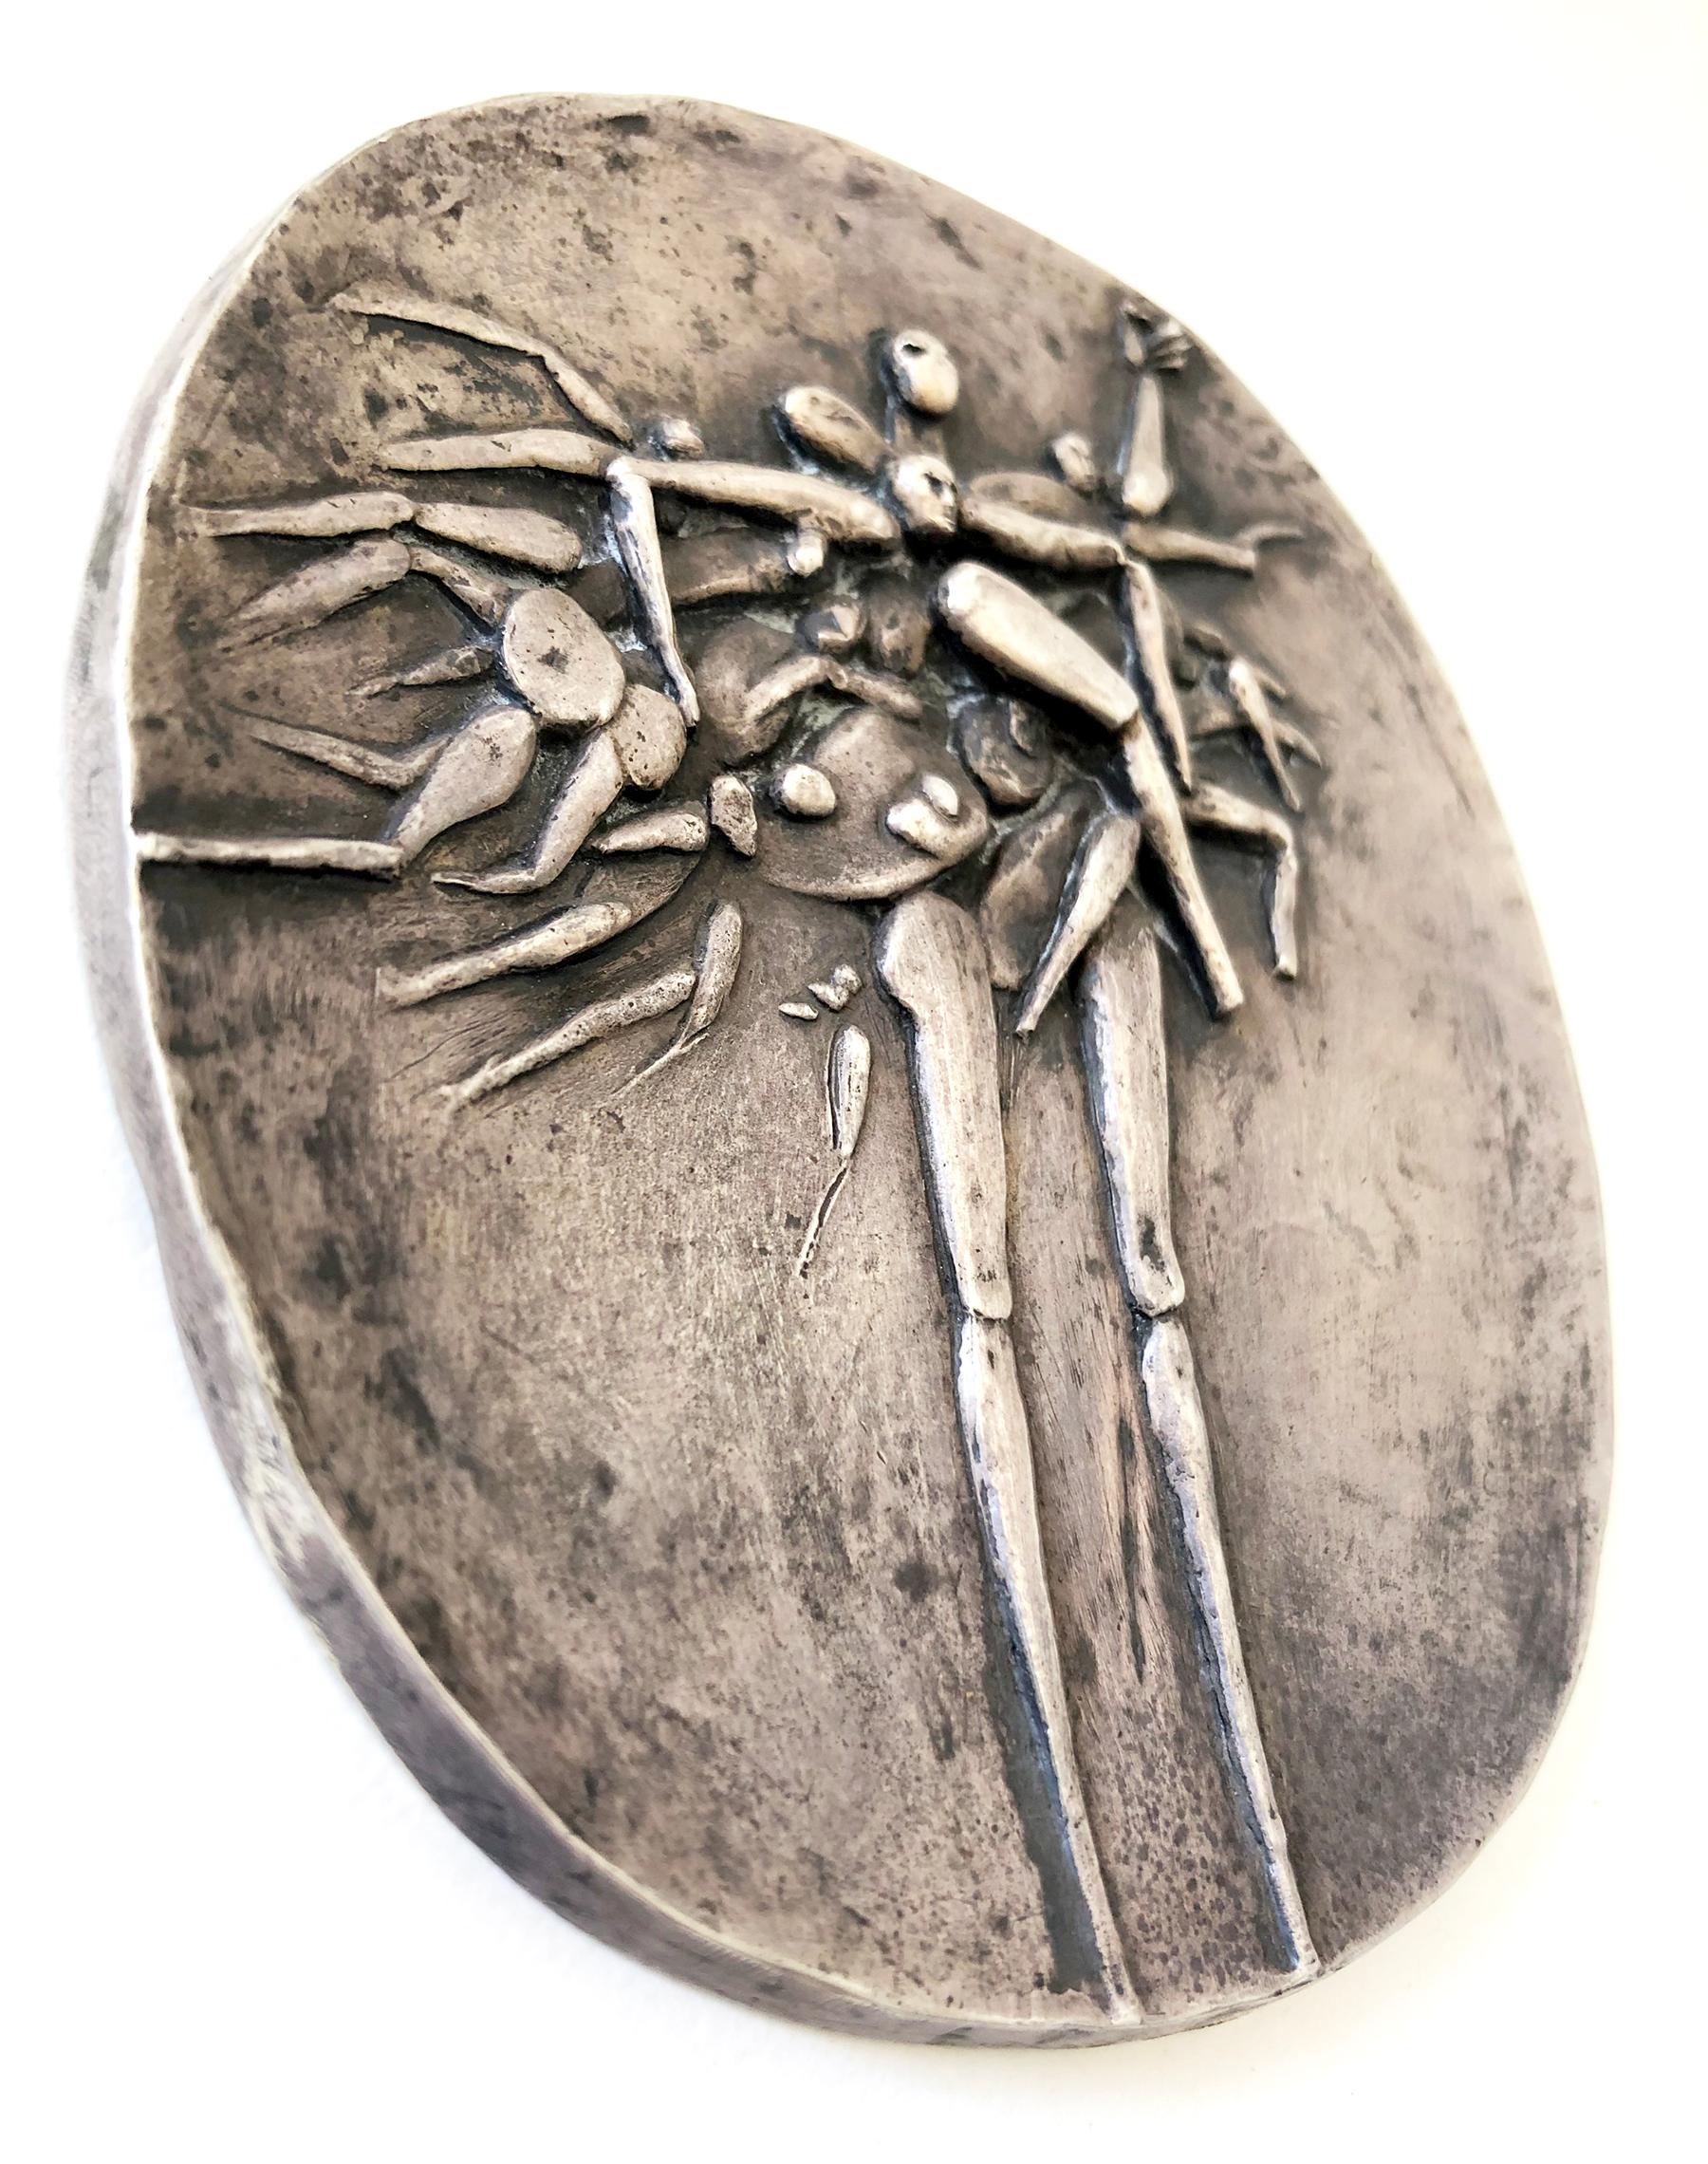 Sterling silver abstract figural bas relief plaque with built in hanging device created by Robert Hansen of Los Angeles, California. Piece measures 4.5